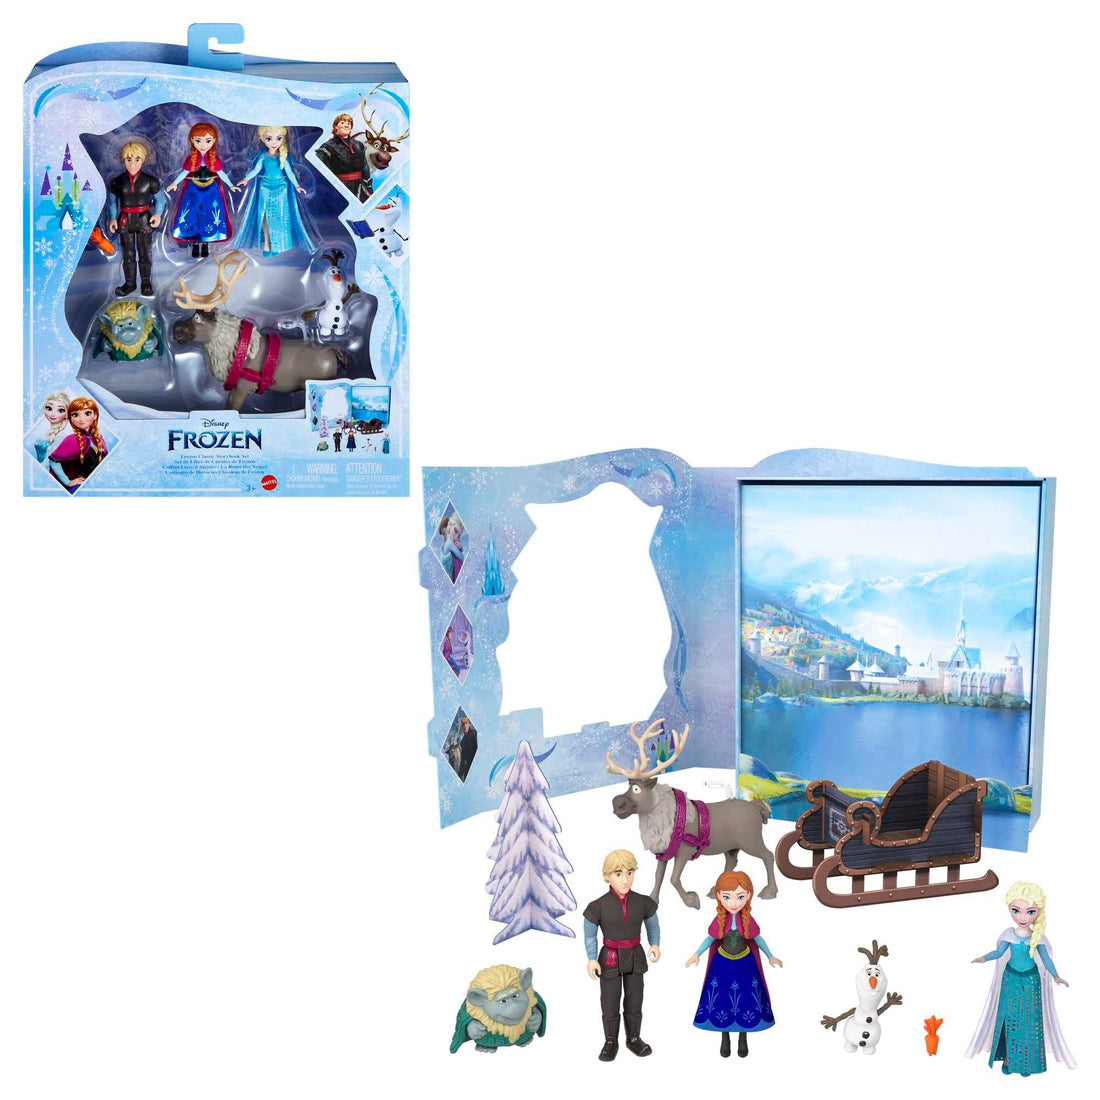 Mattel Disney Frozen Toys, Frozen Story Pack with 6 Key Characters, Small Dolls, Figures and Accessories Inspired by Disney Frozen Movies, Gifts for Kids, HLX04